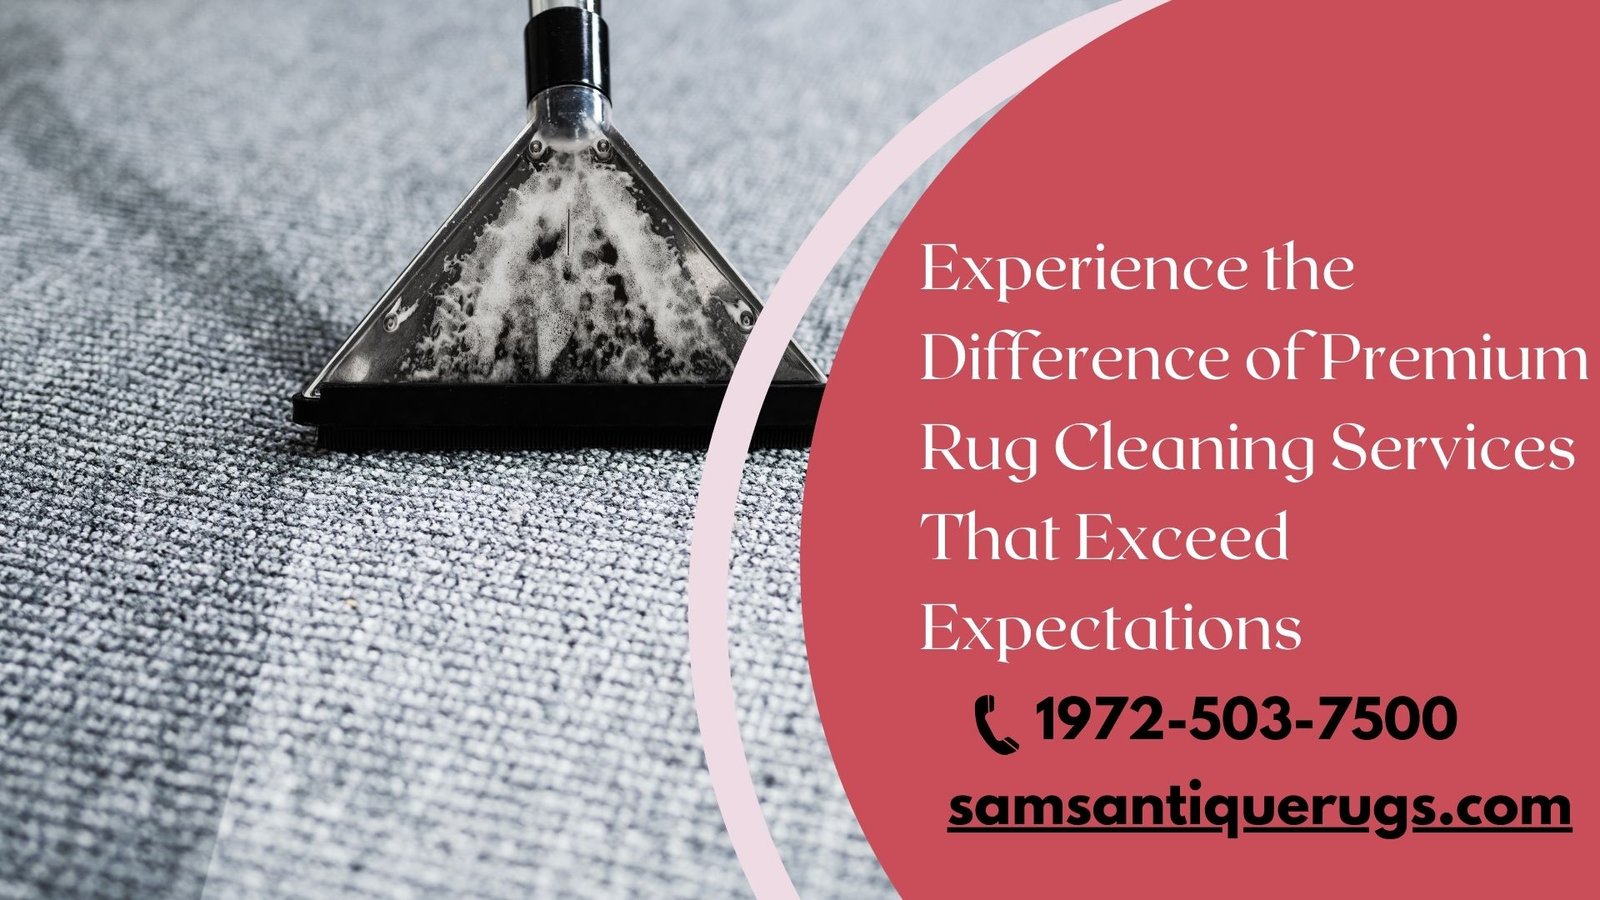 Experience the Difference of Premium Rug Cleaning Services That Exceed Expectations